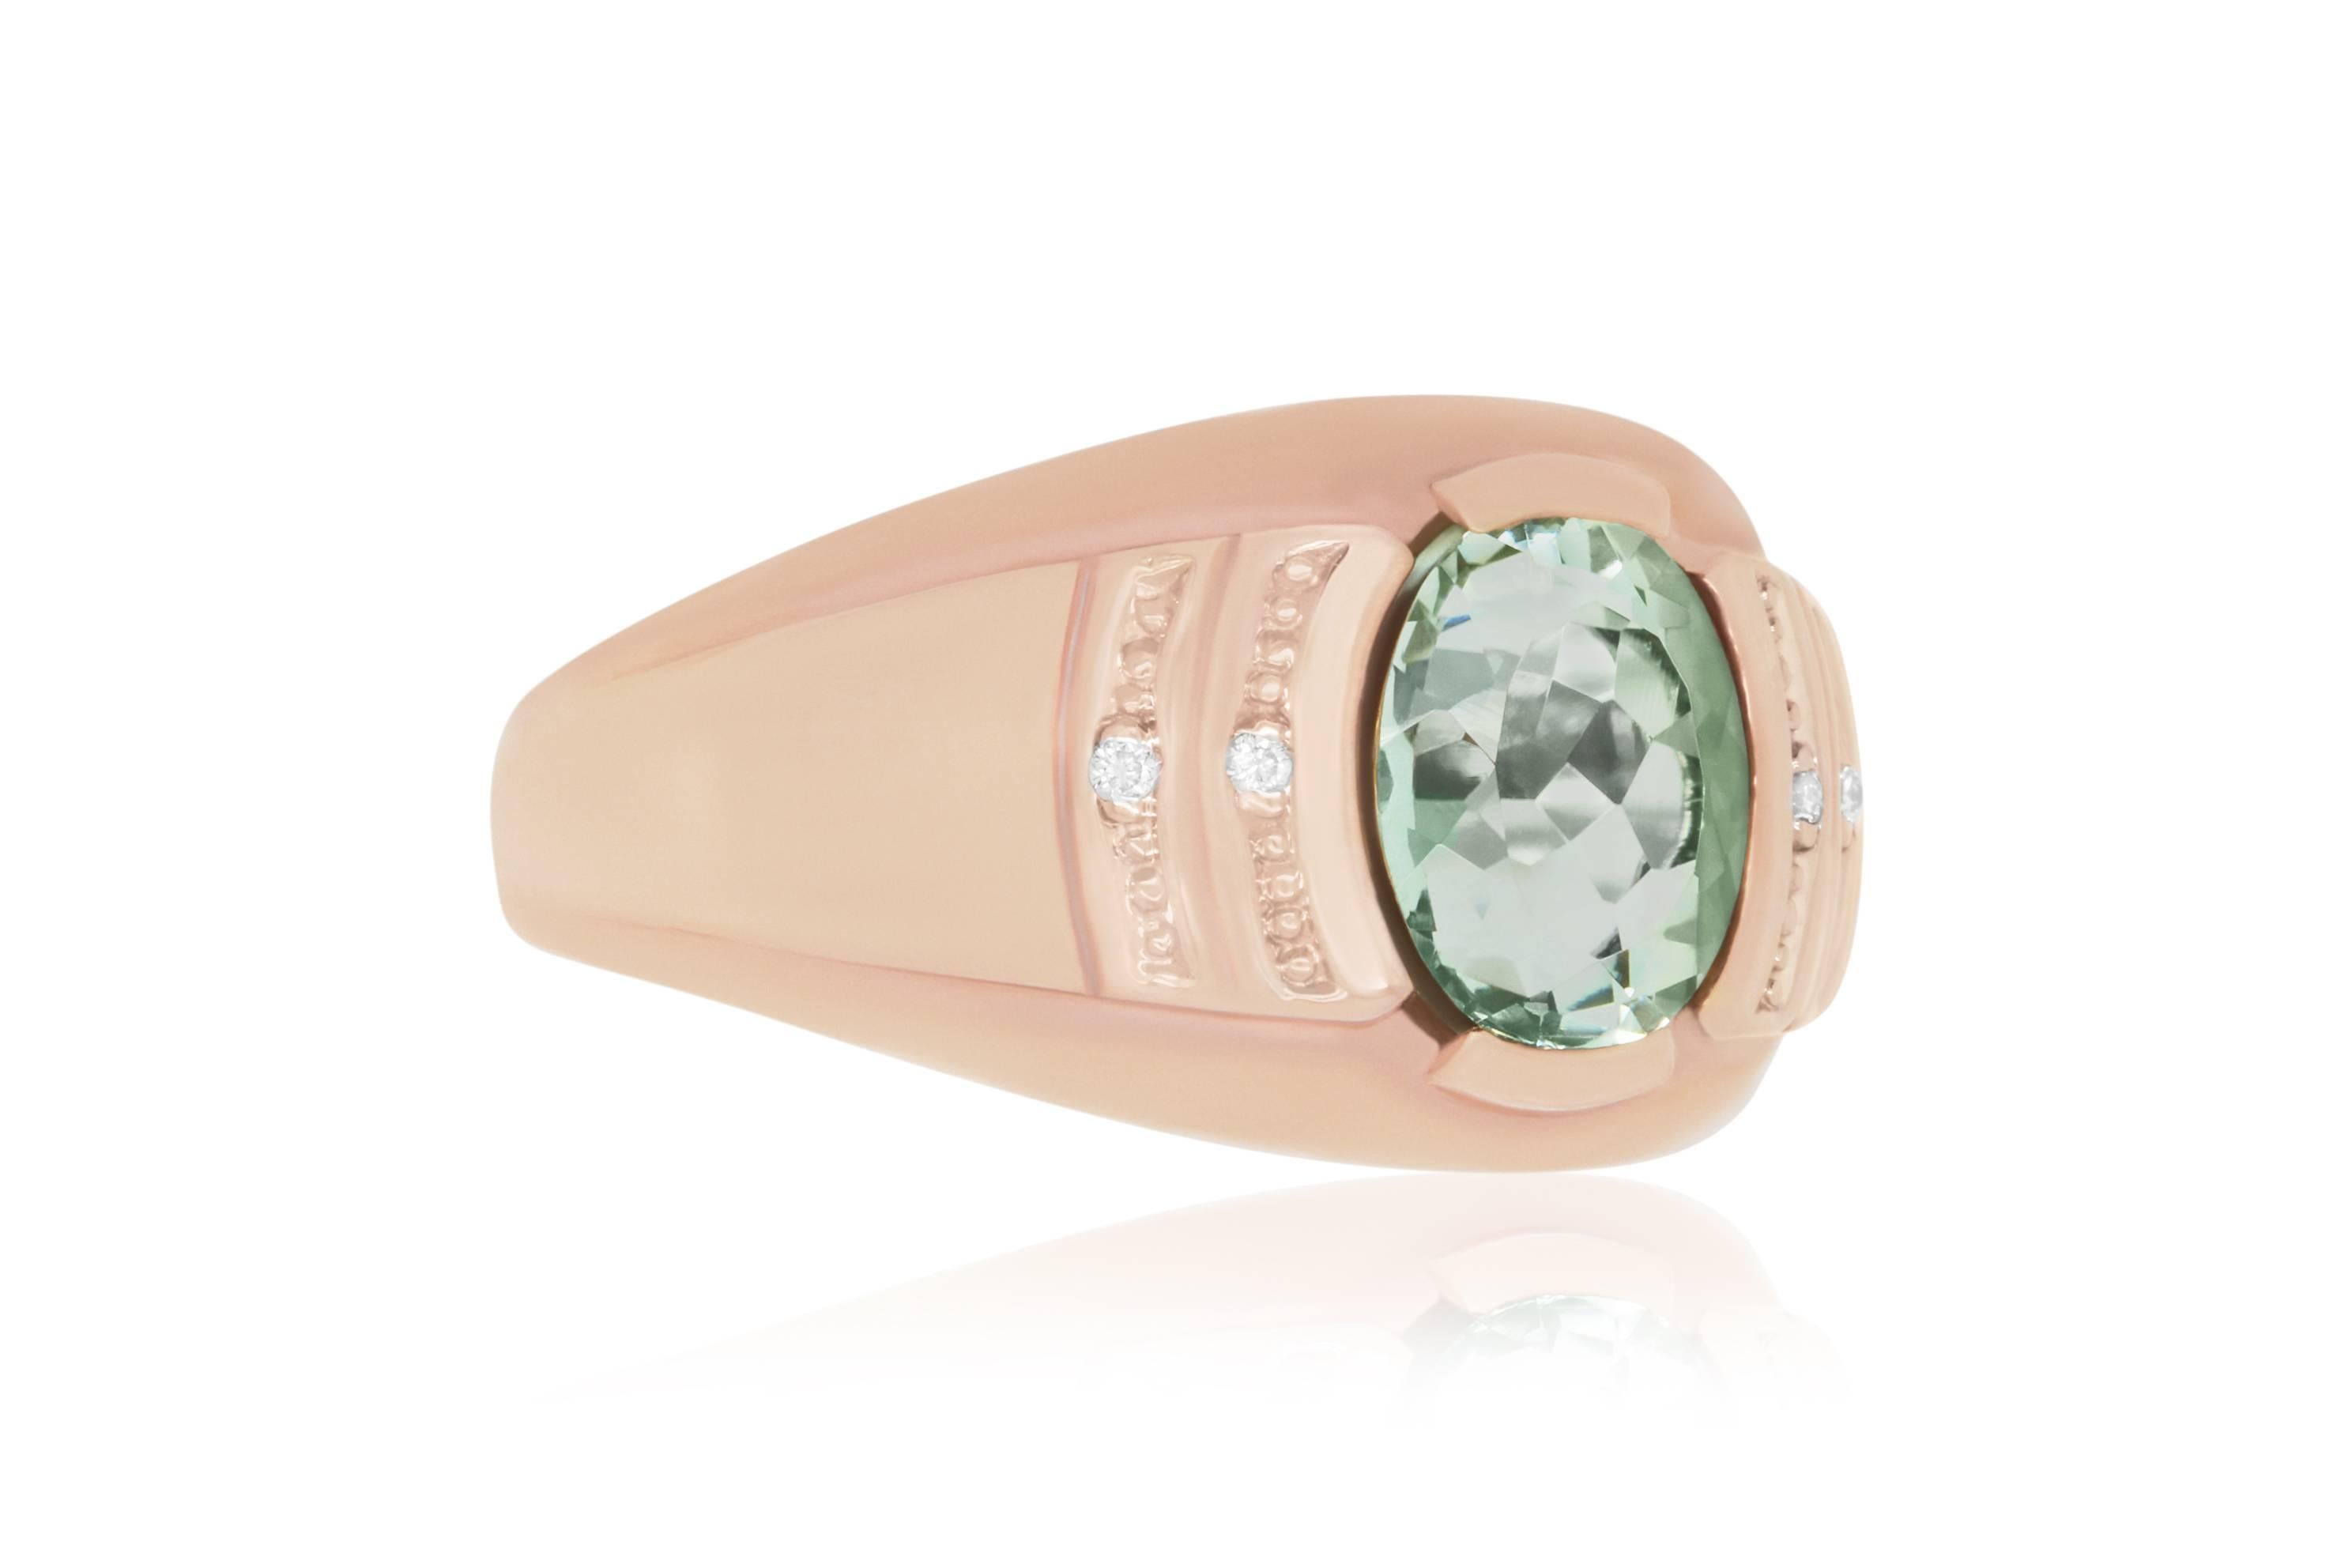 This unique oval 2.76 carat Green Amethyst is set in a 14k Rose Gold with 4 accent white diamonds, framing this beautifully vibrant green color in sparkle and shine!

Material: 14k Rose Gold
Colored Diamond: 1 Oval Green Amethyst at 2.76